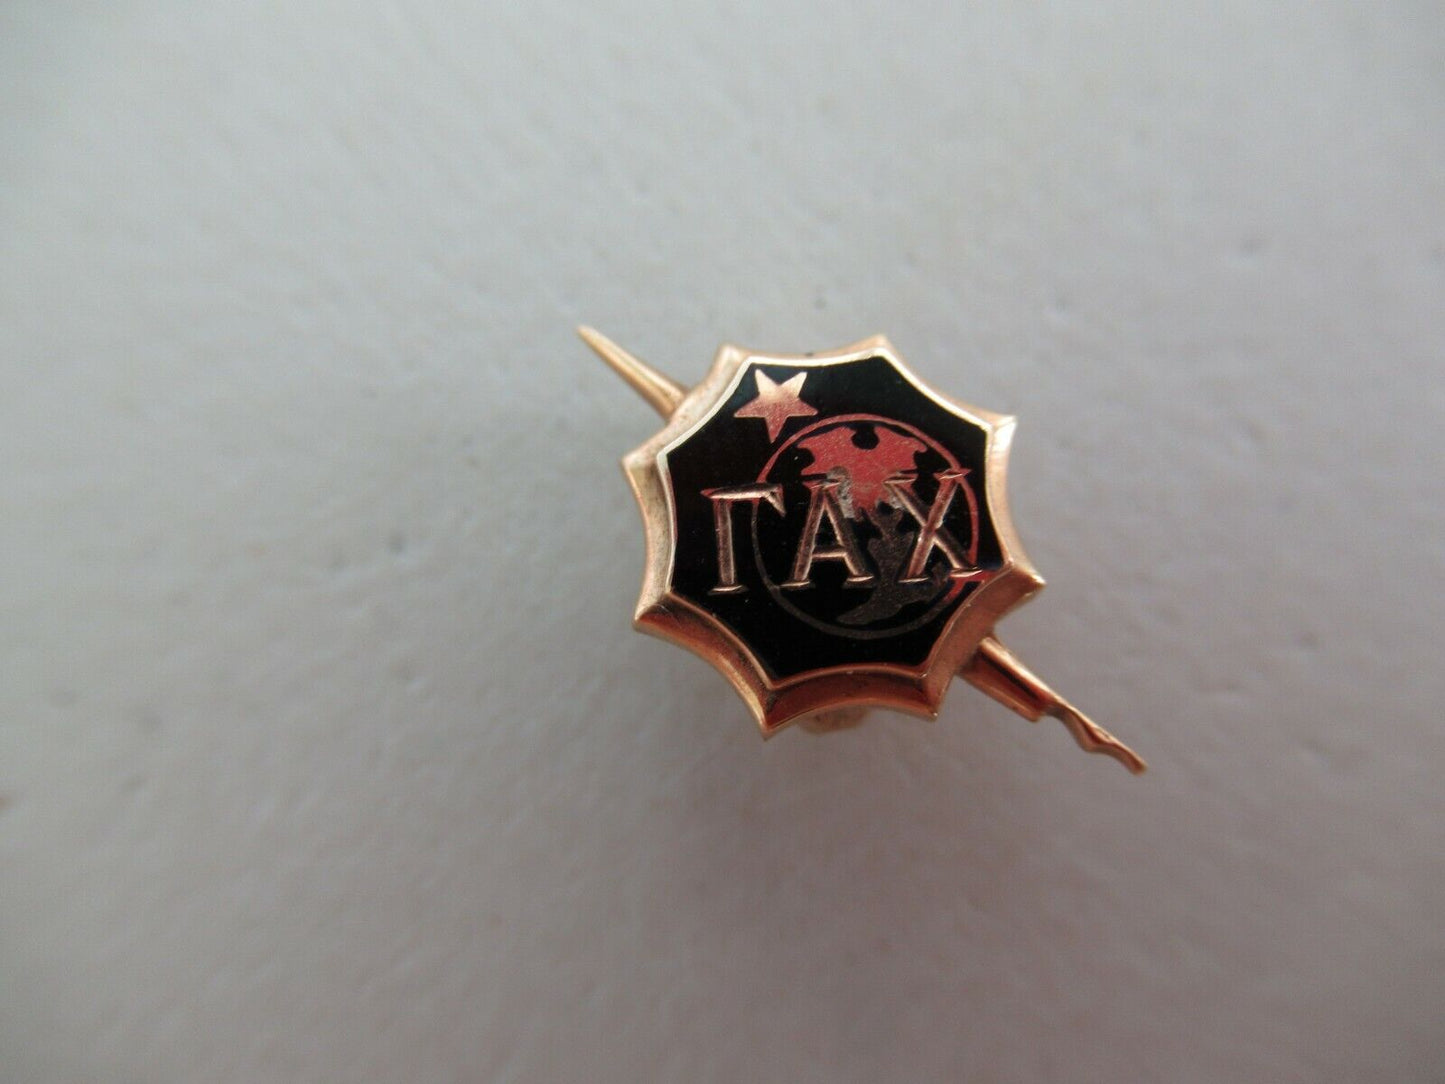 USA FRATERNITY PIN GAMMA ALPHA CHI. MADE IN GOLD. 1959. NAMED. 781